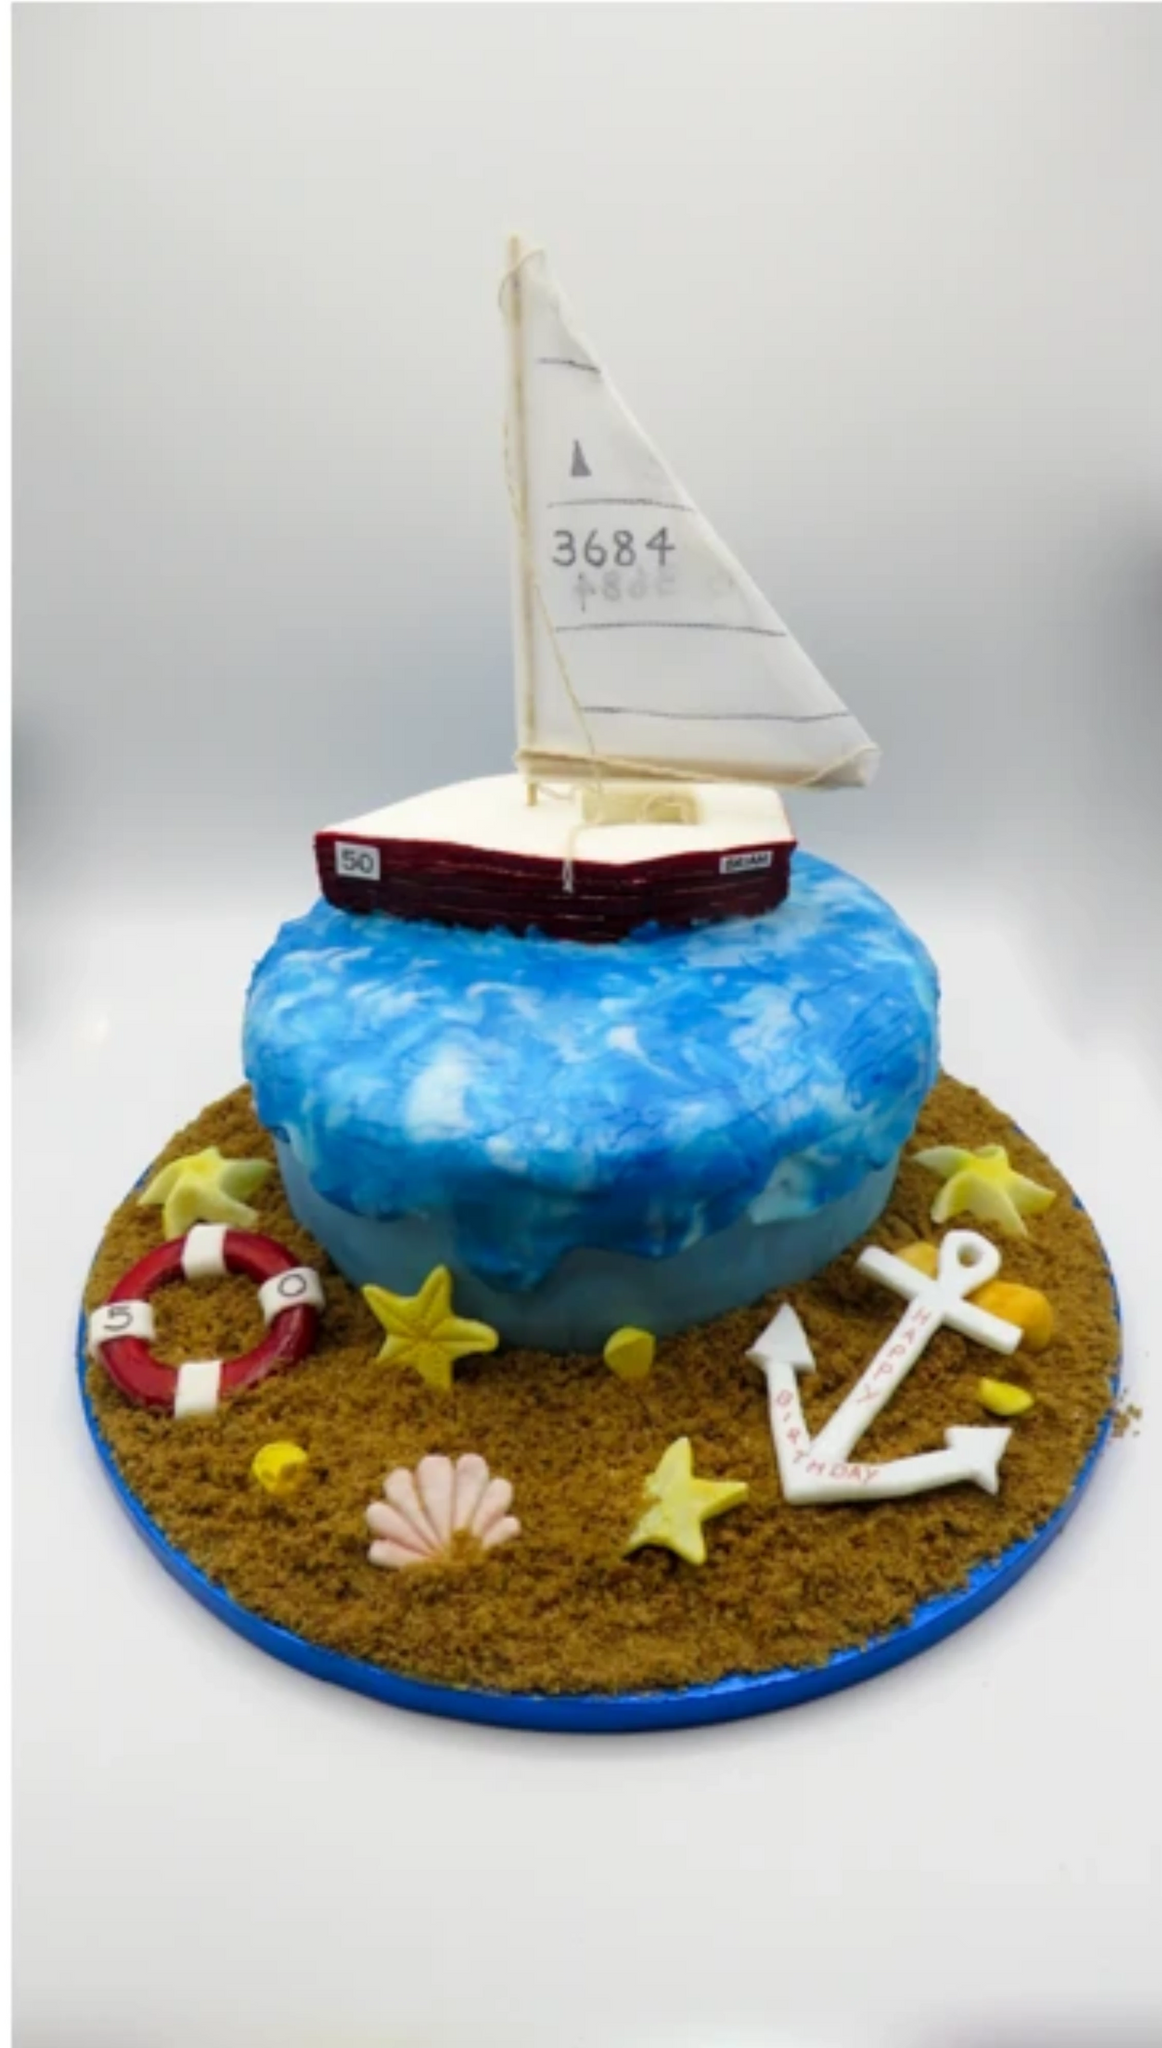 Tanker Cake | Boat cake, Sculpted cakes, Creative cakes